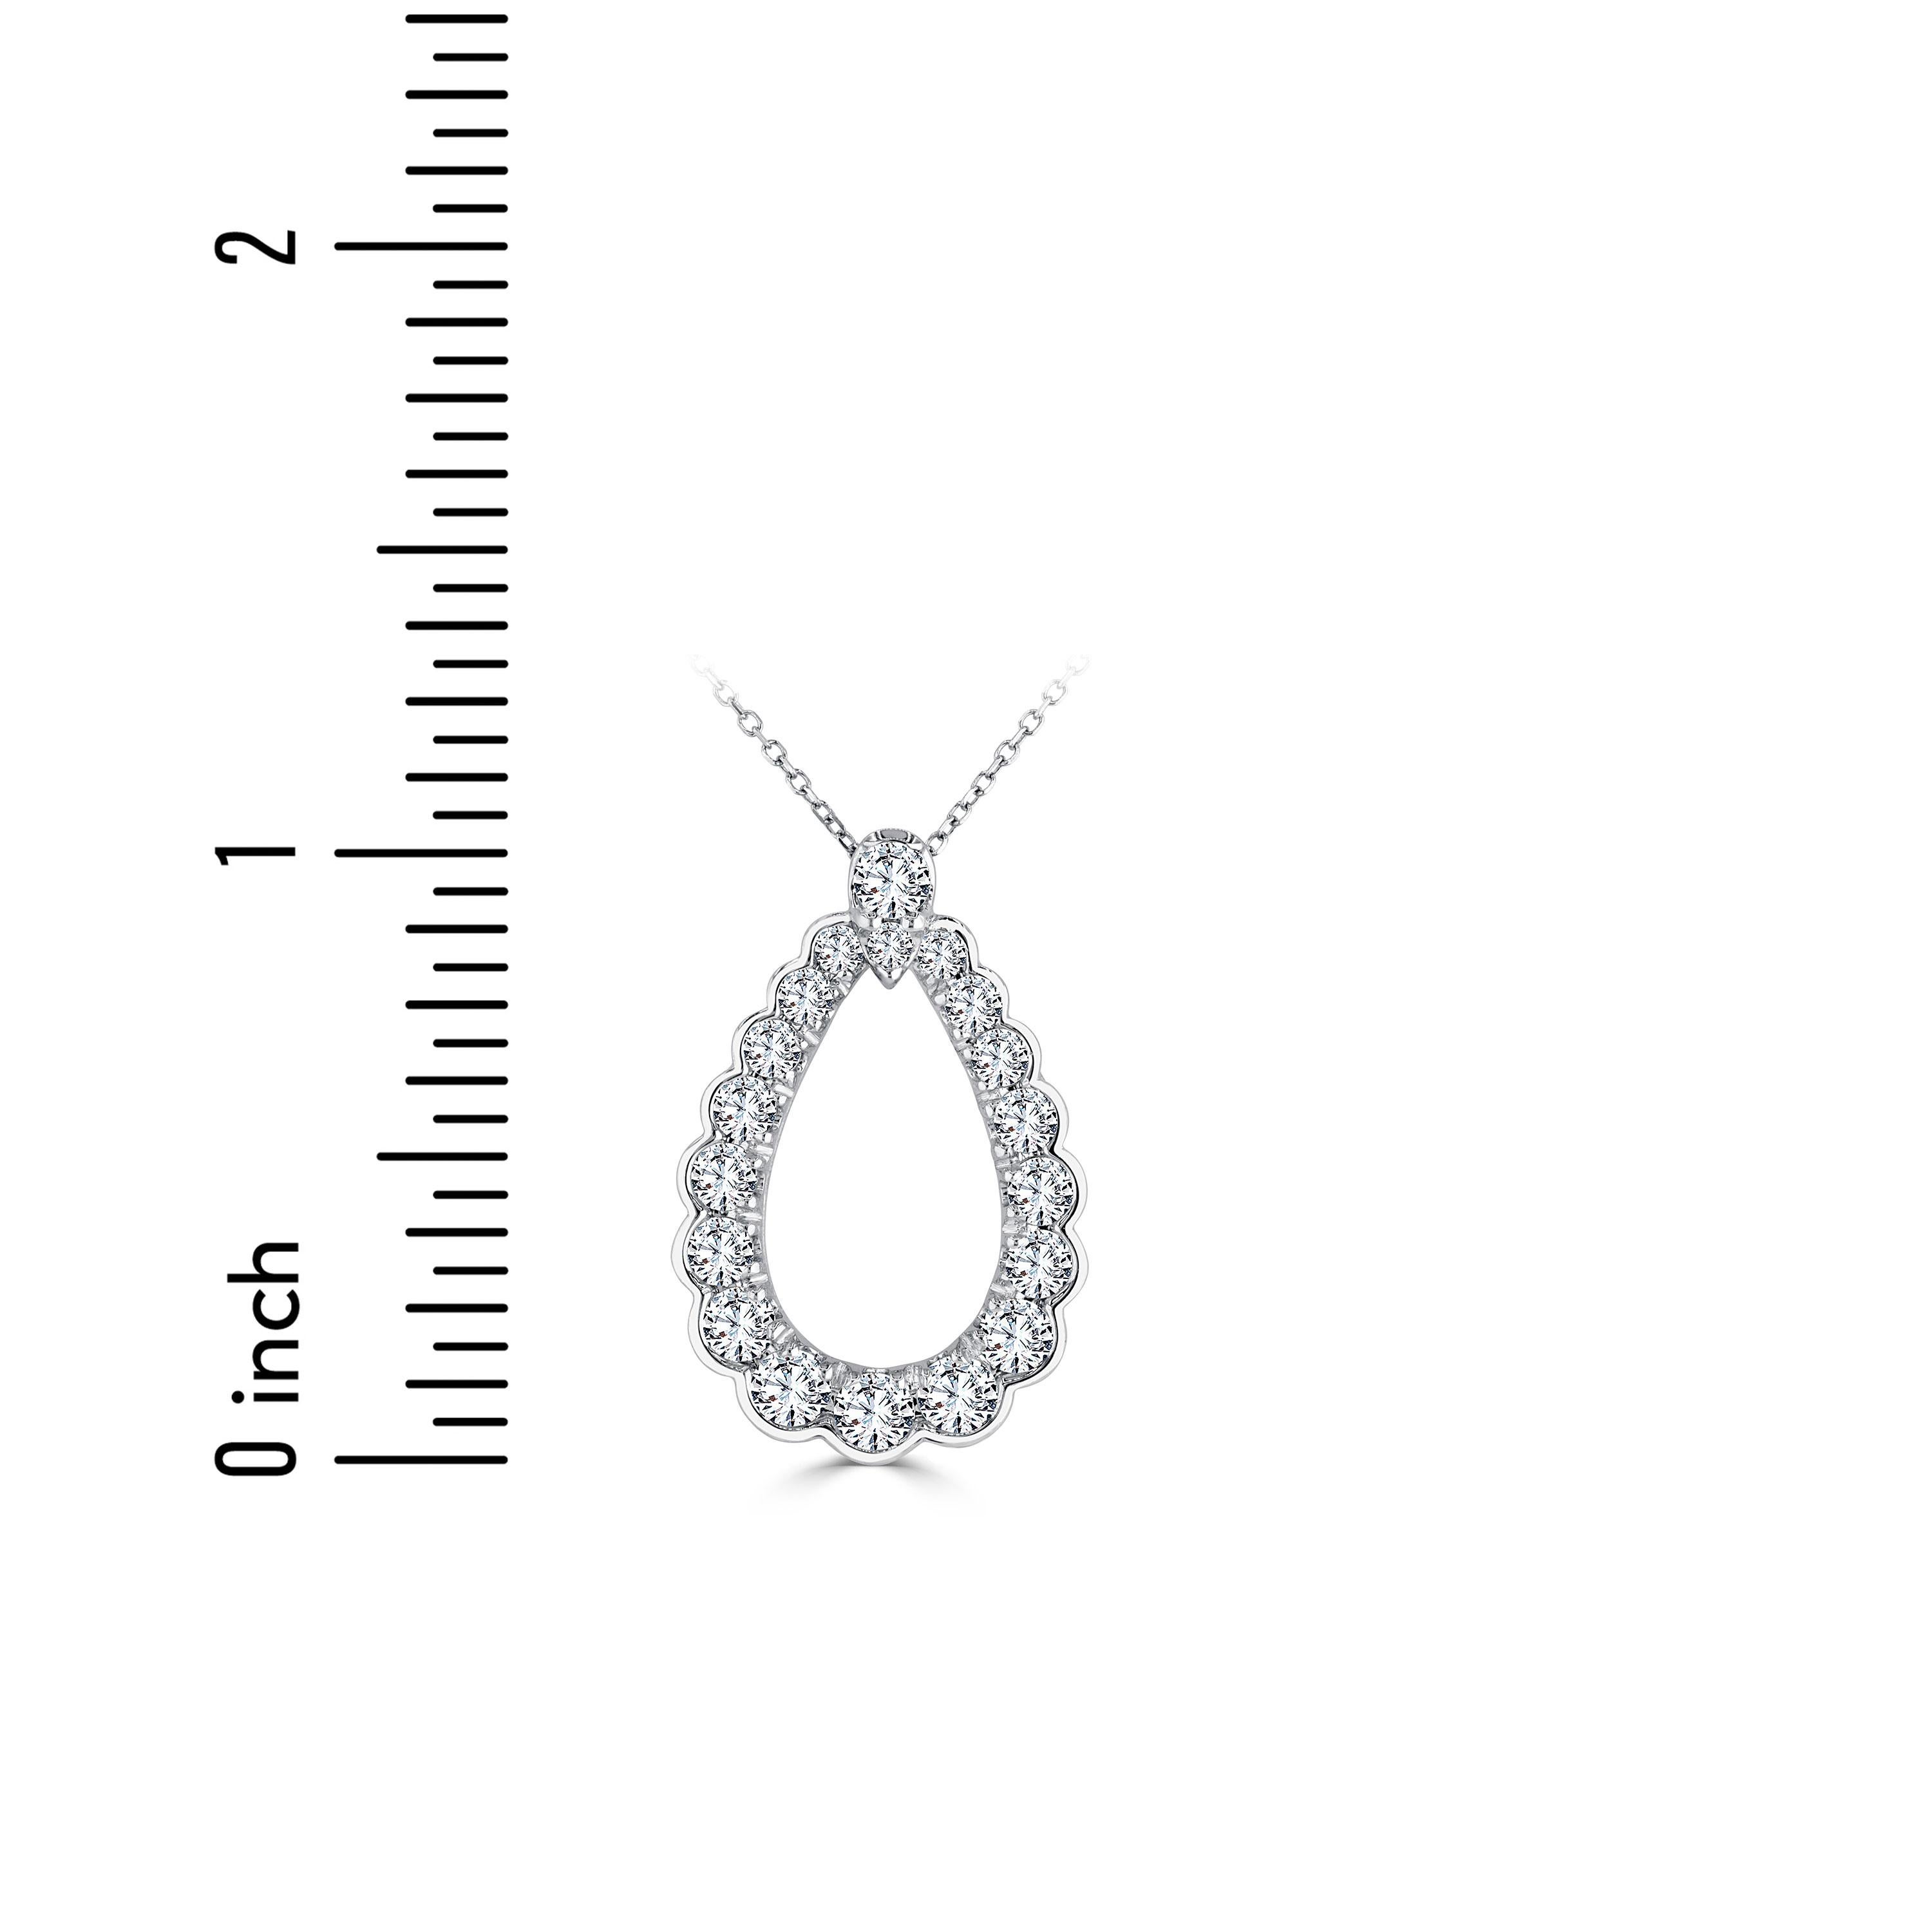 This beautiful pendant has the form of a pear shape 14k white gold frame with a scalloped edge, made of carefully selected graduated size round natural diamonds. Total diamond weight 1.52 carats. The chain of this pendant is detachable.

DiamondTown